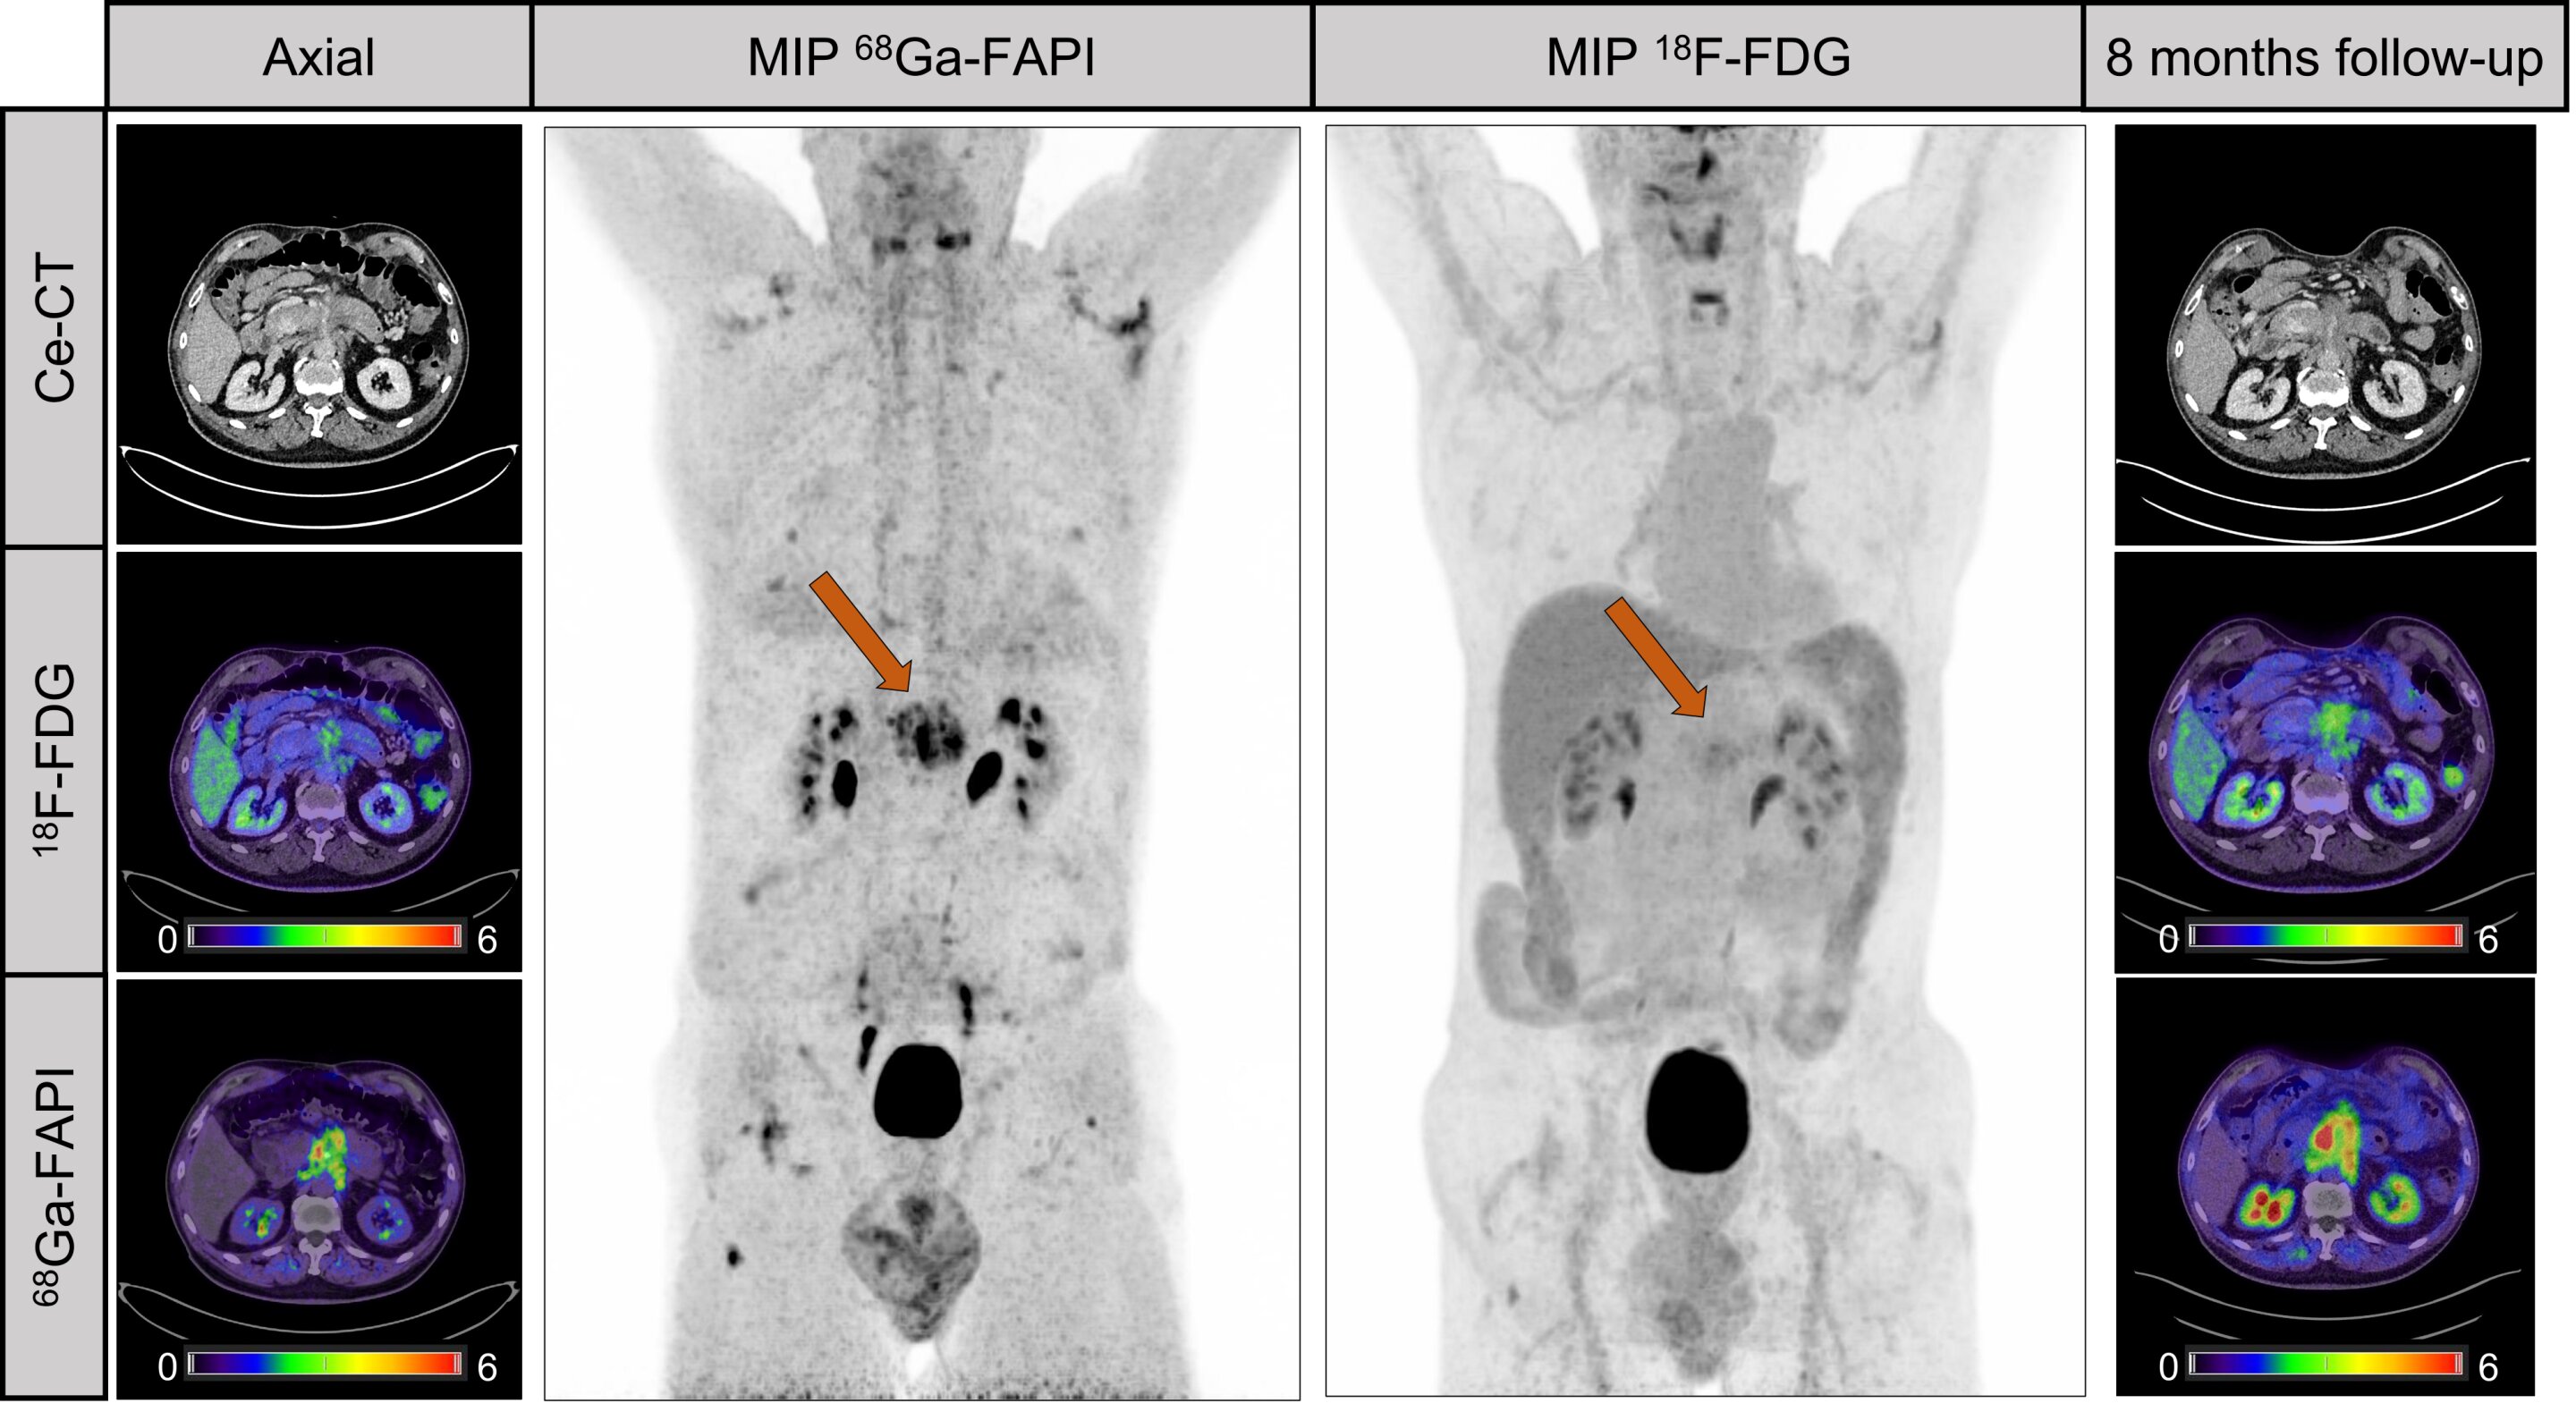 #Ga-68 FAPI PET found to improve detection and staging of pancreatic cancer